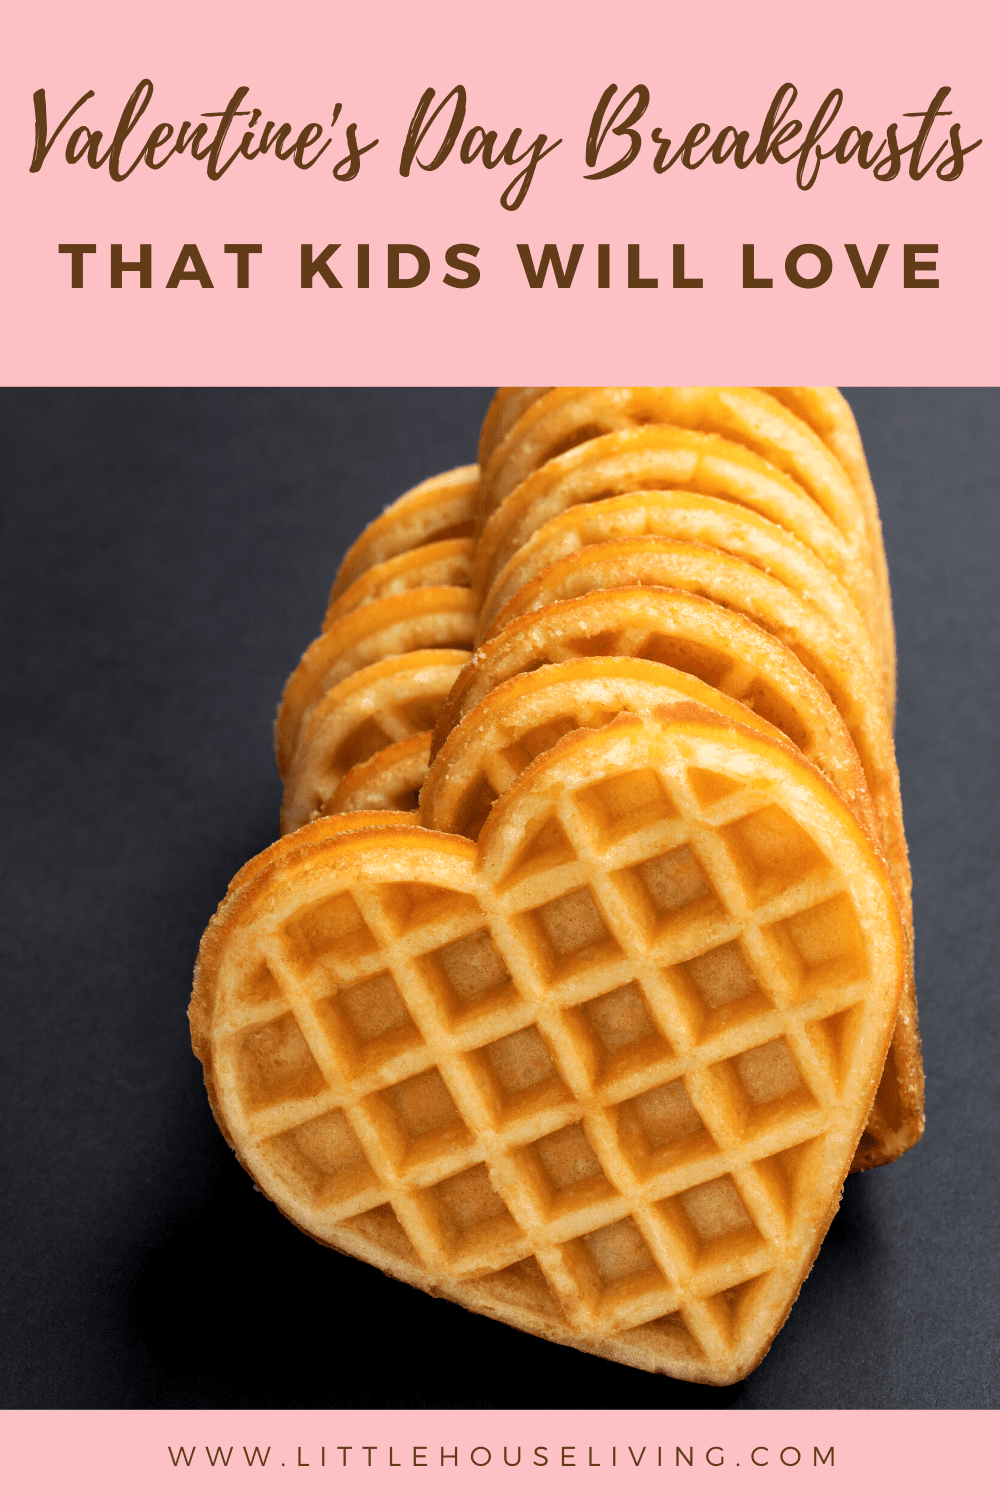 Trying to find something special but simple that you can make for the kids this year? Here are some easy Valentine Breakfast Ideas kids will love!